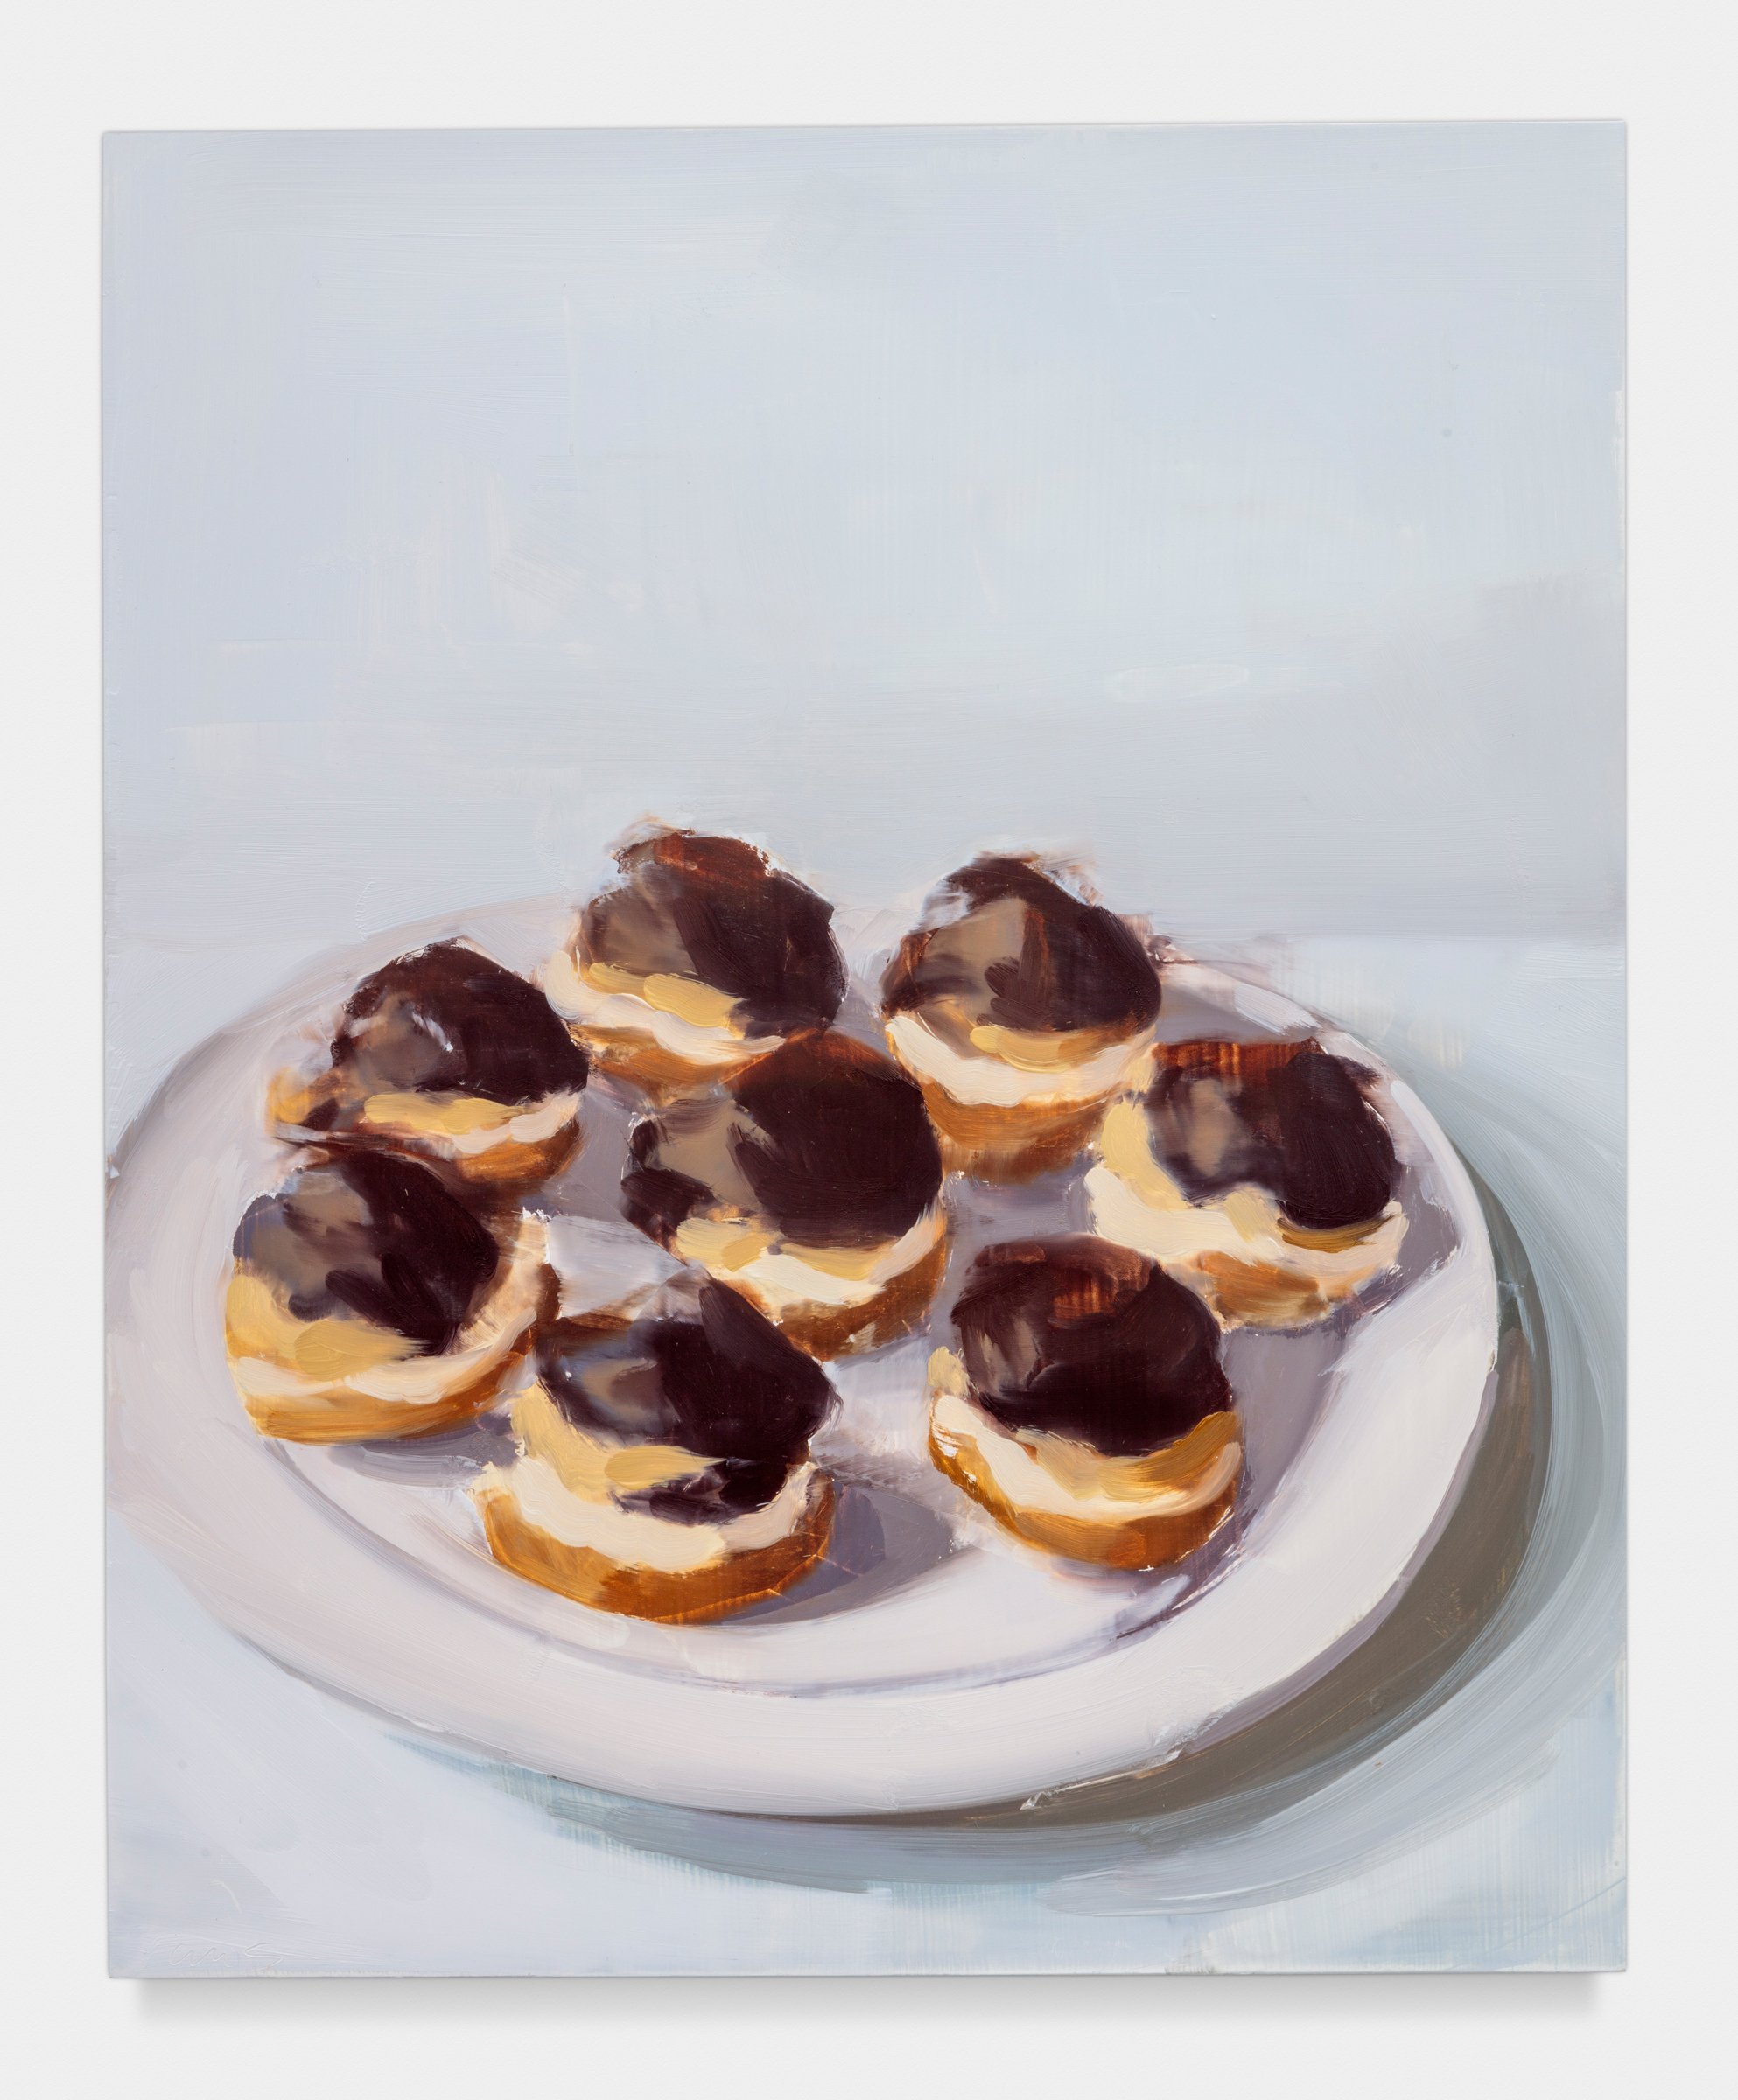  Carrie Mae Smith Cream Puffs 2022 Oil on ACM panel (Aluminum Composite Material) 17h x 14w in 43.18h x 35.56w cm 